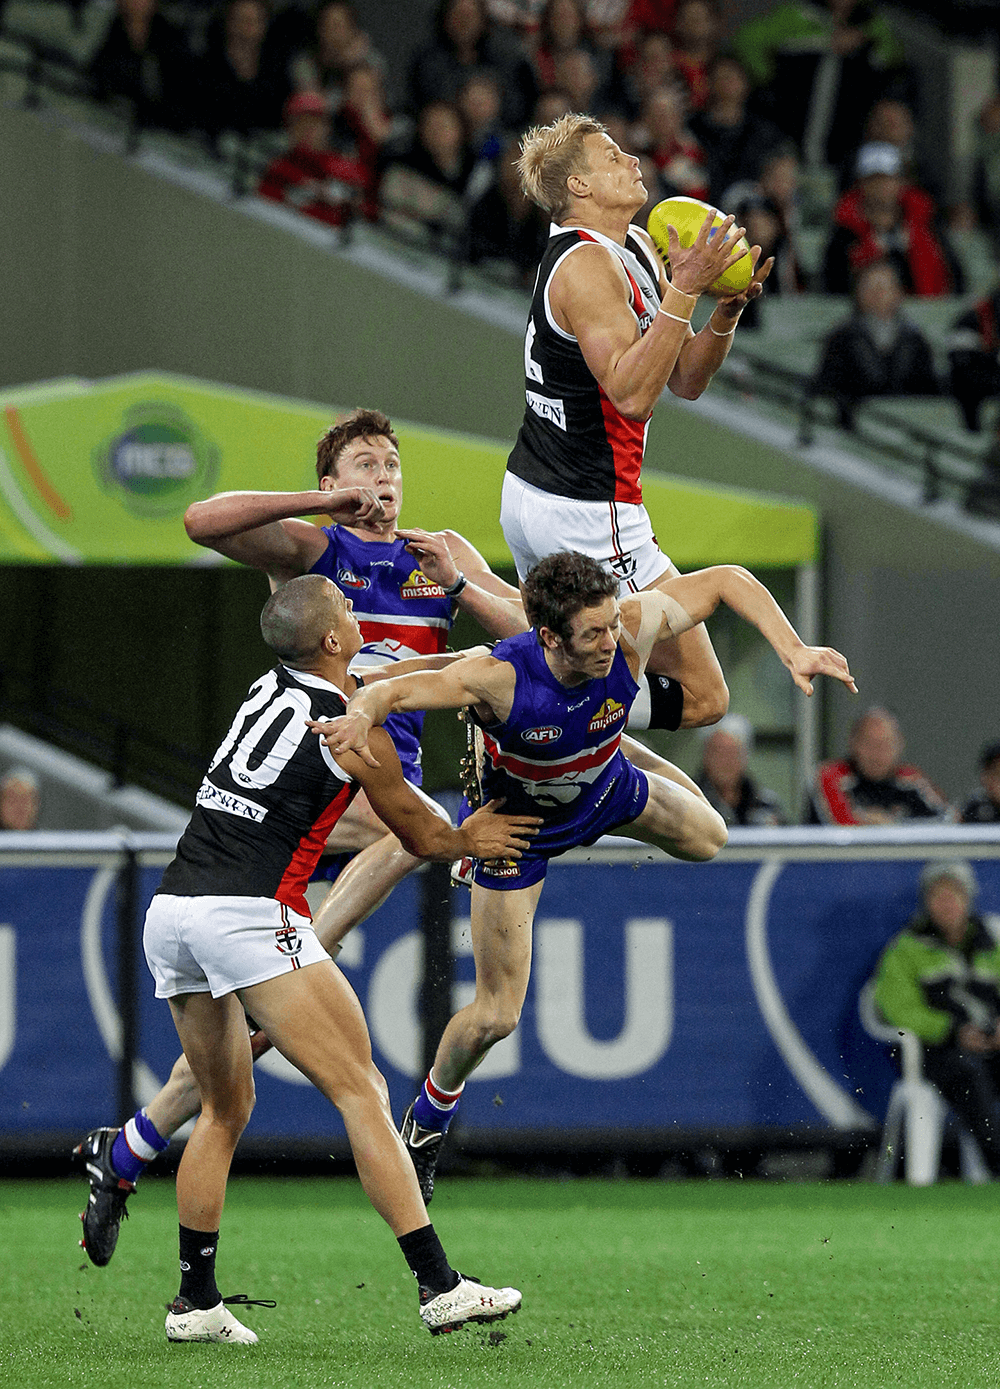 St Kilda’s Nick Riewoldt takes a mark over Western Bulldogs player Robert Murphy, before tumbling to the ground during the second preliminary final clash in 2010 at the MCG. Canon EOS 1D Mark III, 400m lens. 1/250s @ f4, ISO 4000.